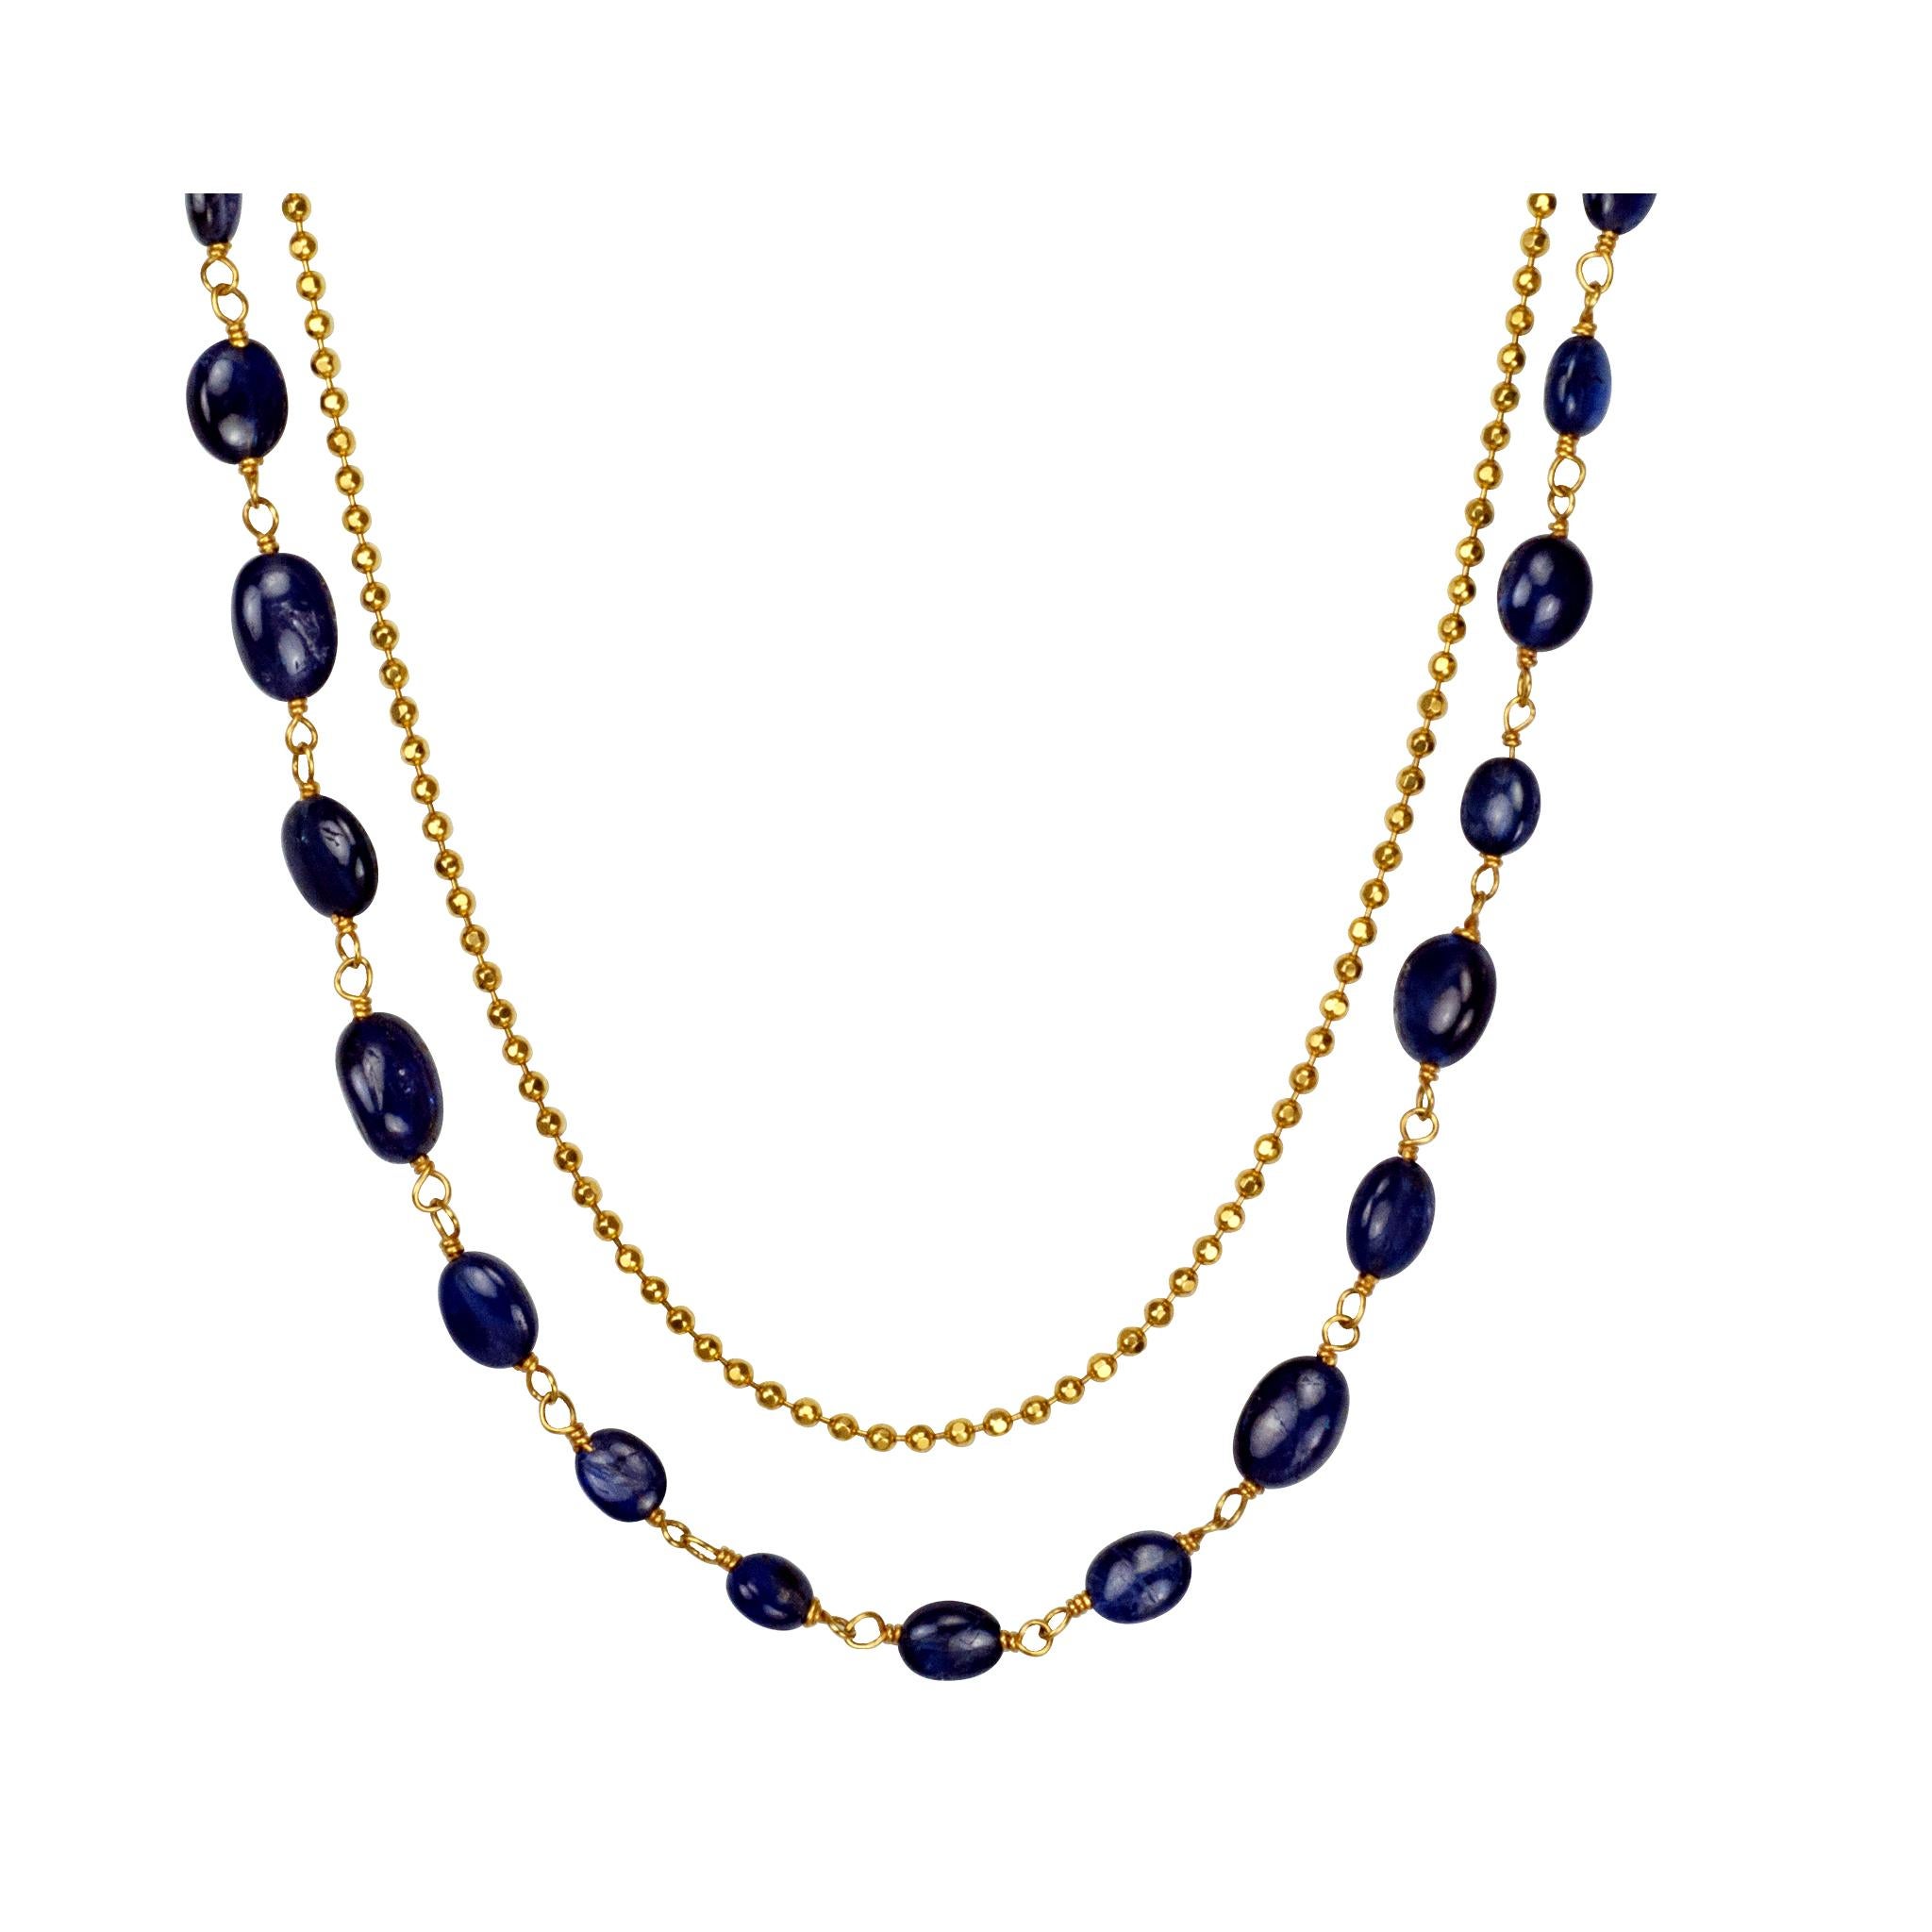 Layered 18 inch Blue Sapphire Cabochon Bead and 14K Yellow Gold Chain Necklace. This multi-strand necklace features vivid round faceted blue sapphire beads. Great Layering piece for everyday. Wear with your favorite pair of jeans.

Blue sapphire is